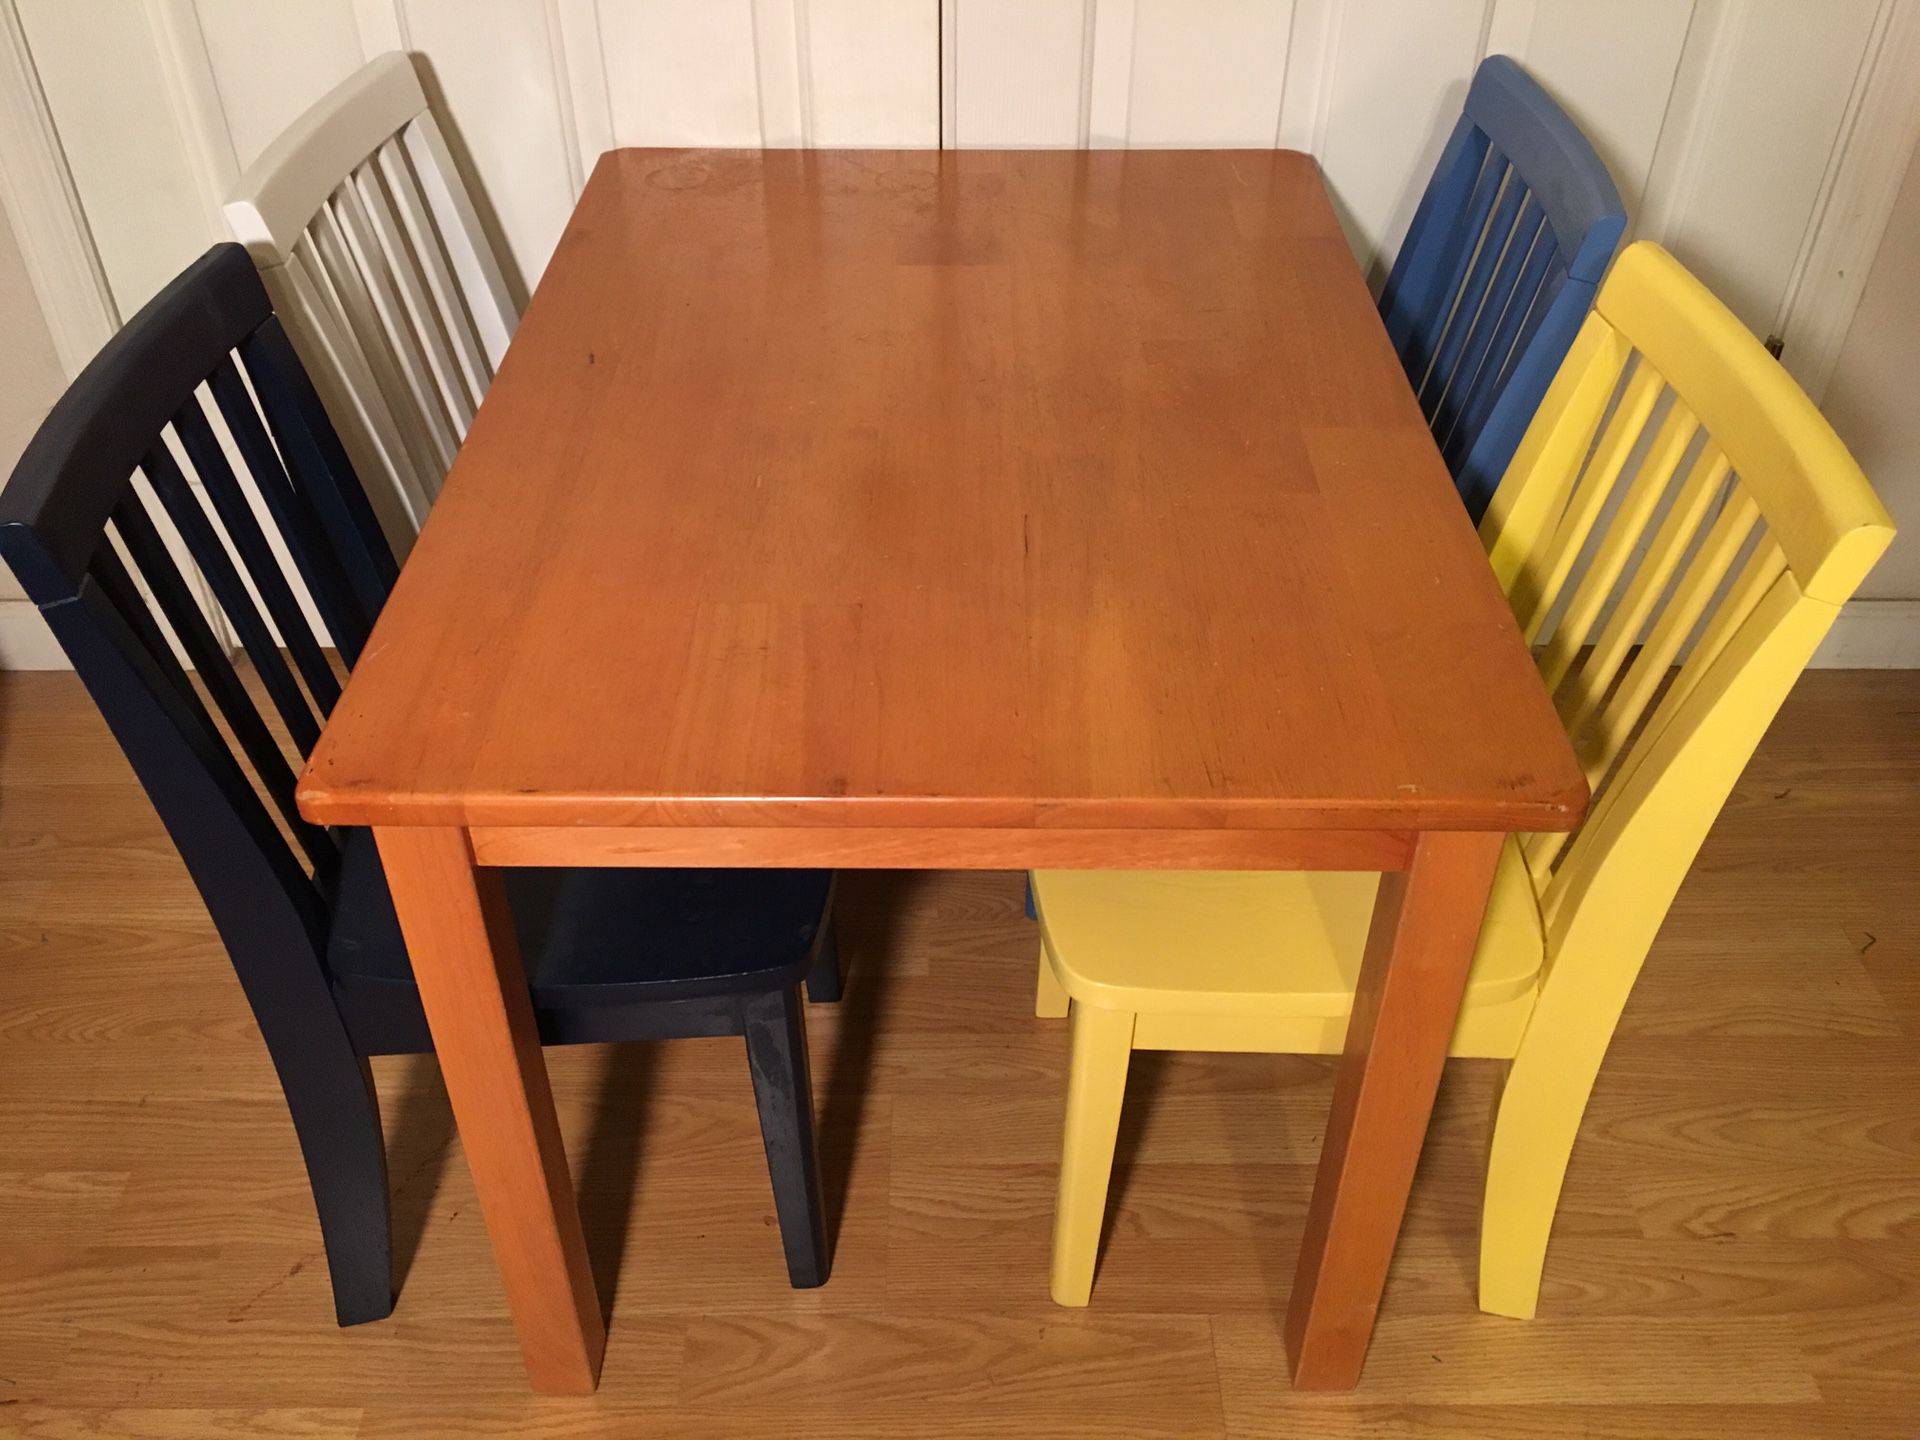 Pottery barn kids carolina table and four chairs